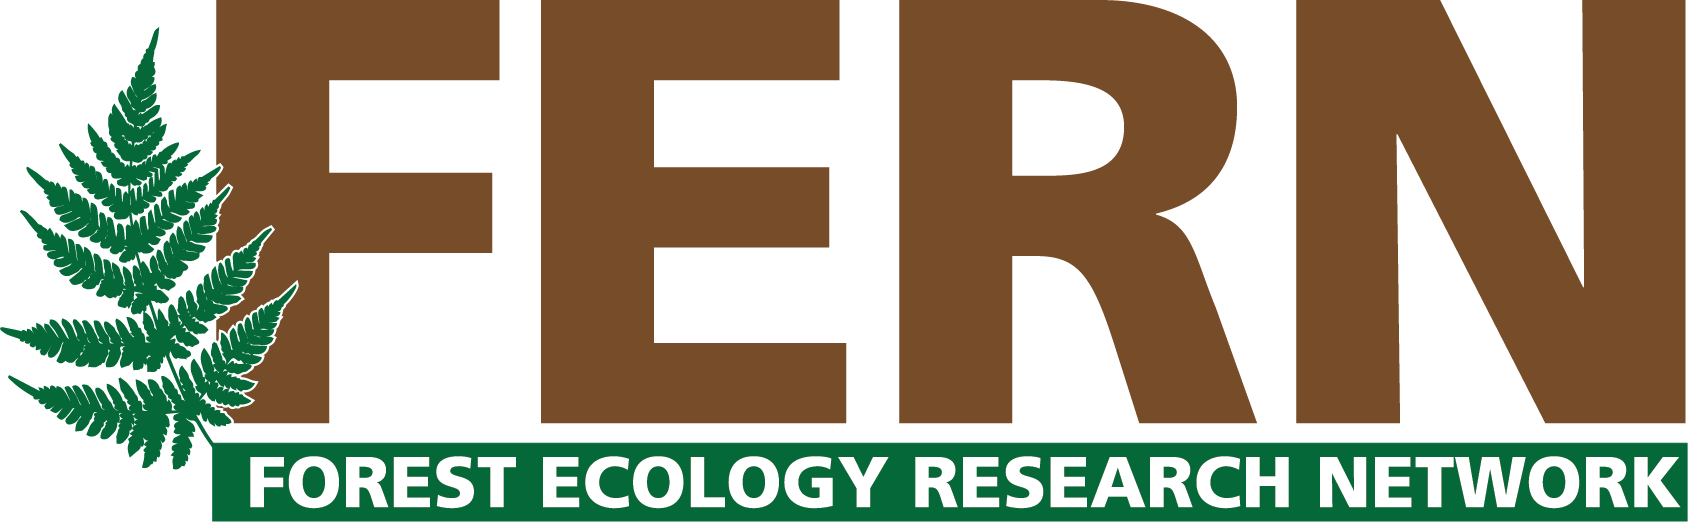 Forest Ecology Research Network